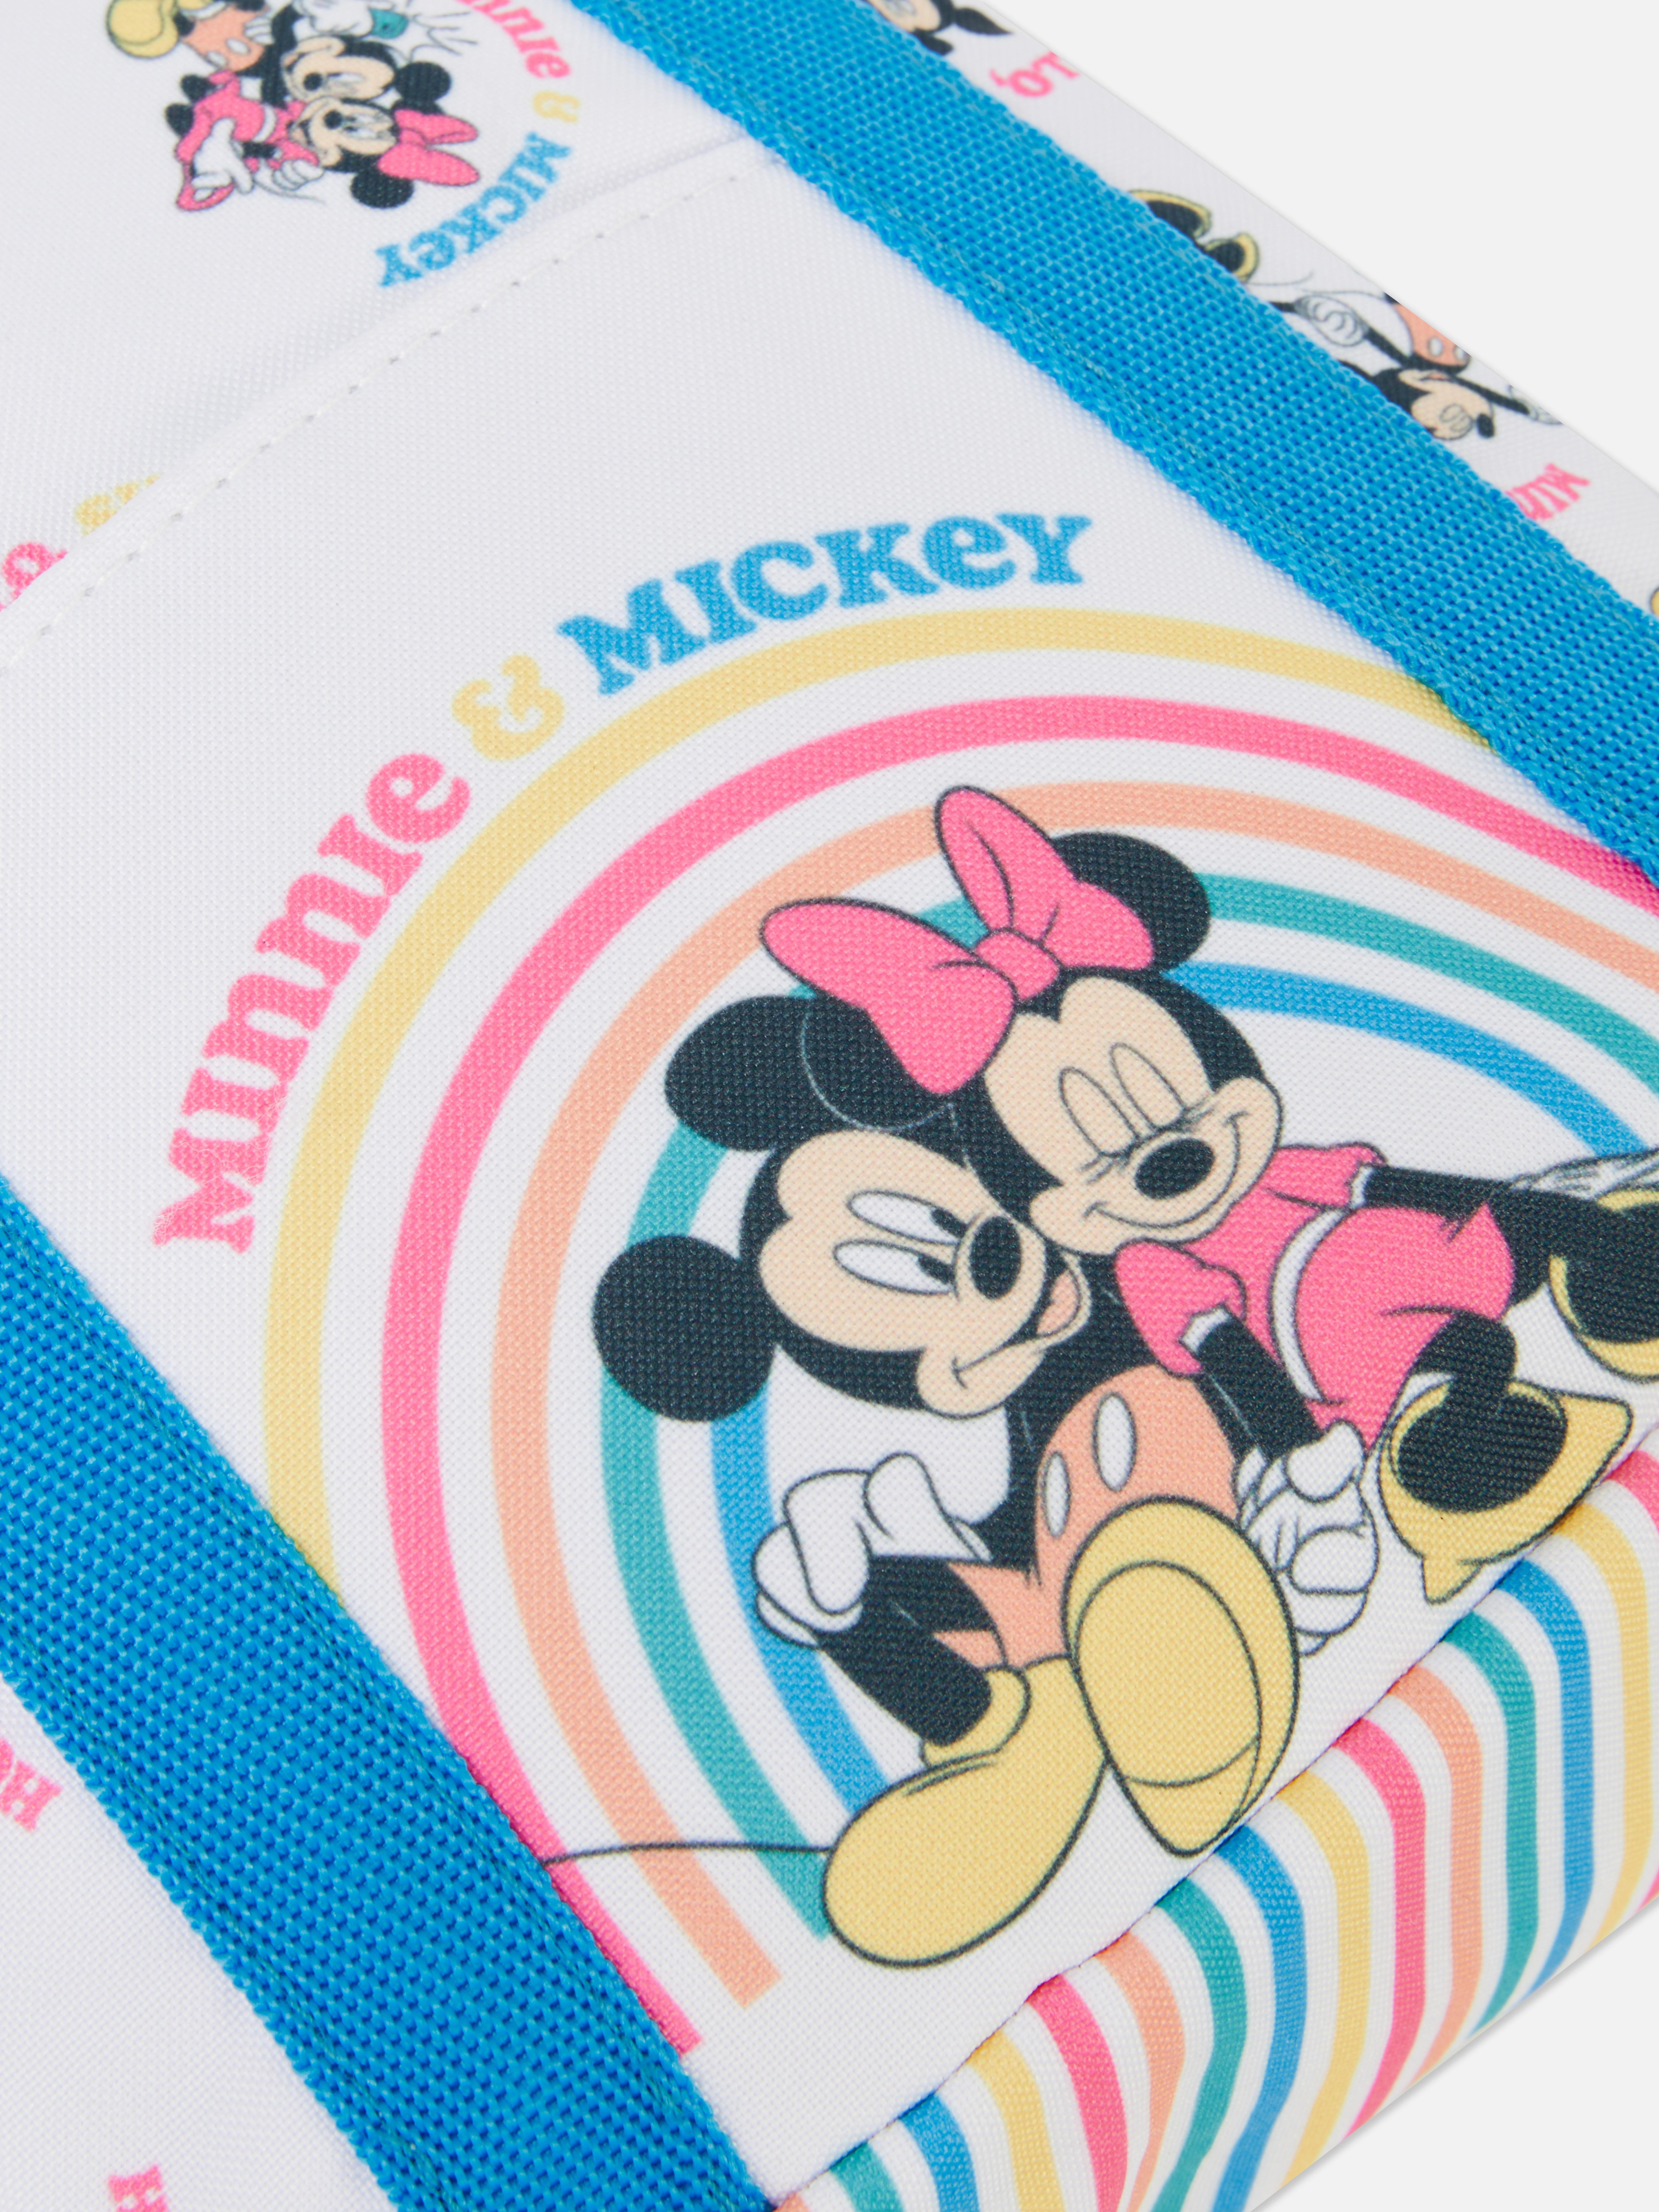 Disney’s Mickey & Minnie Mouse Backpack